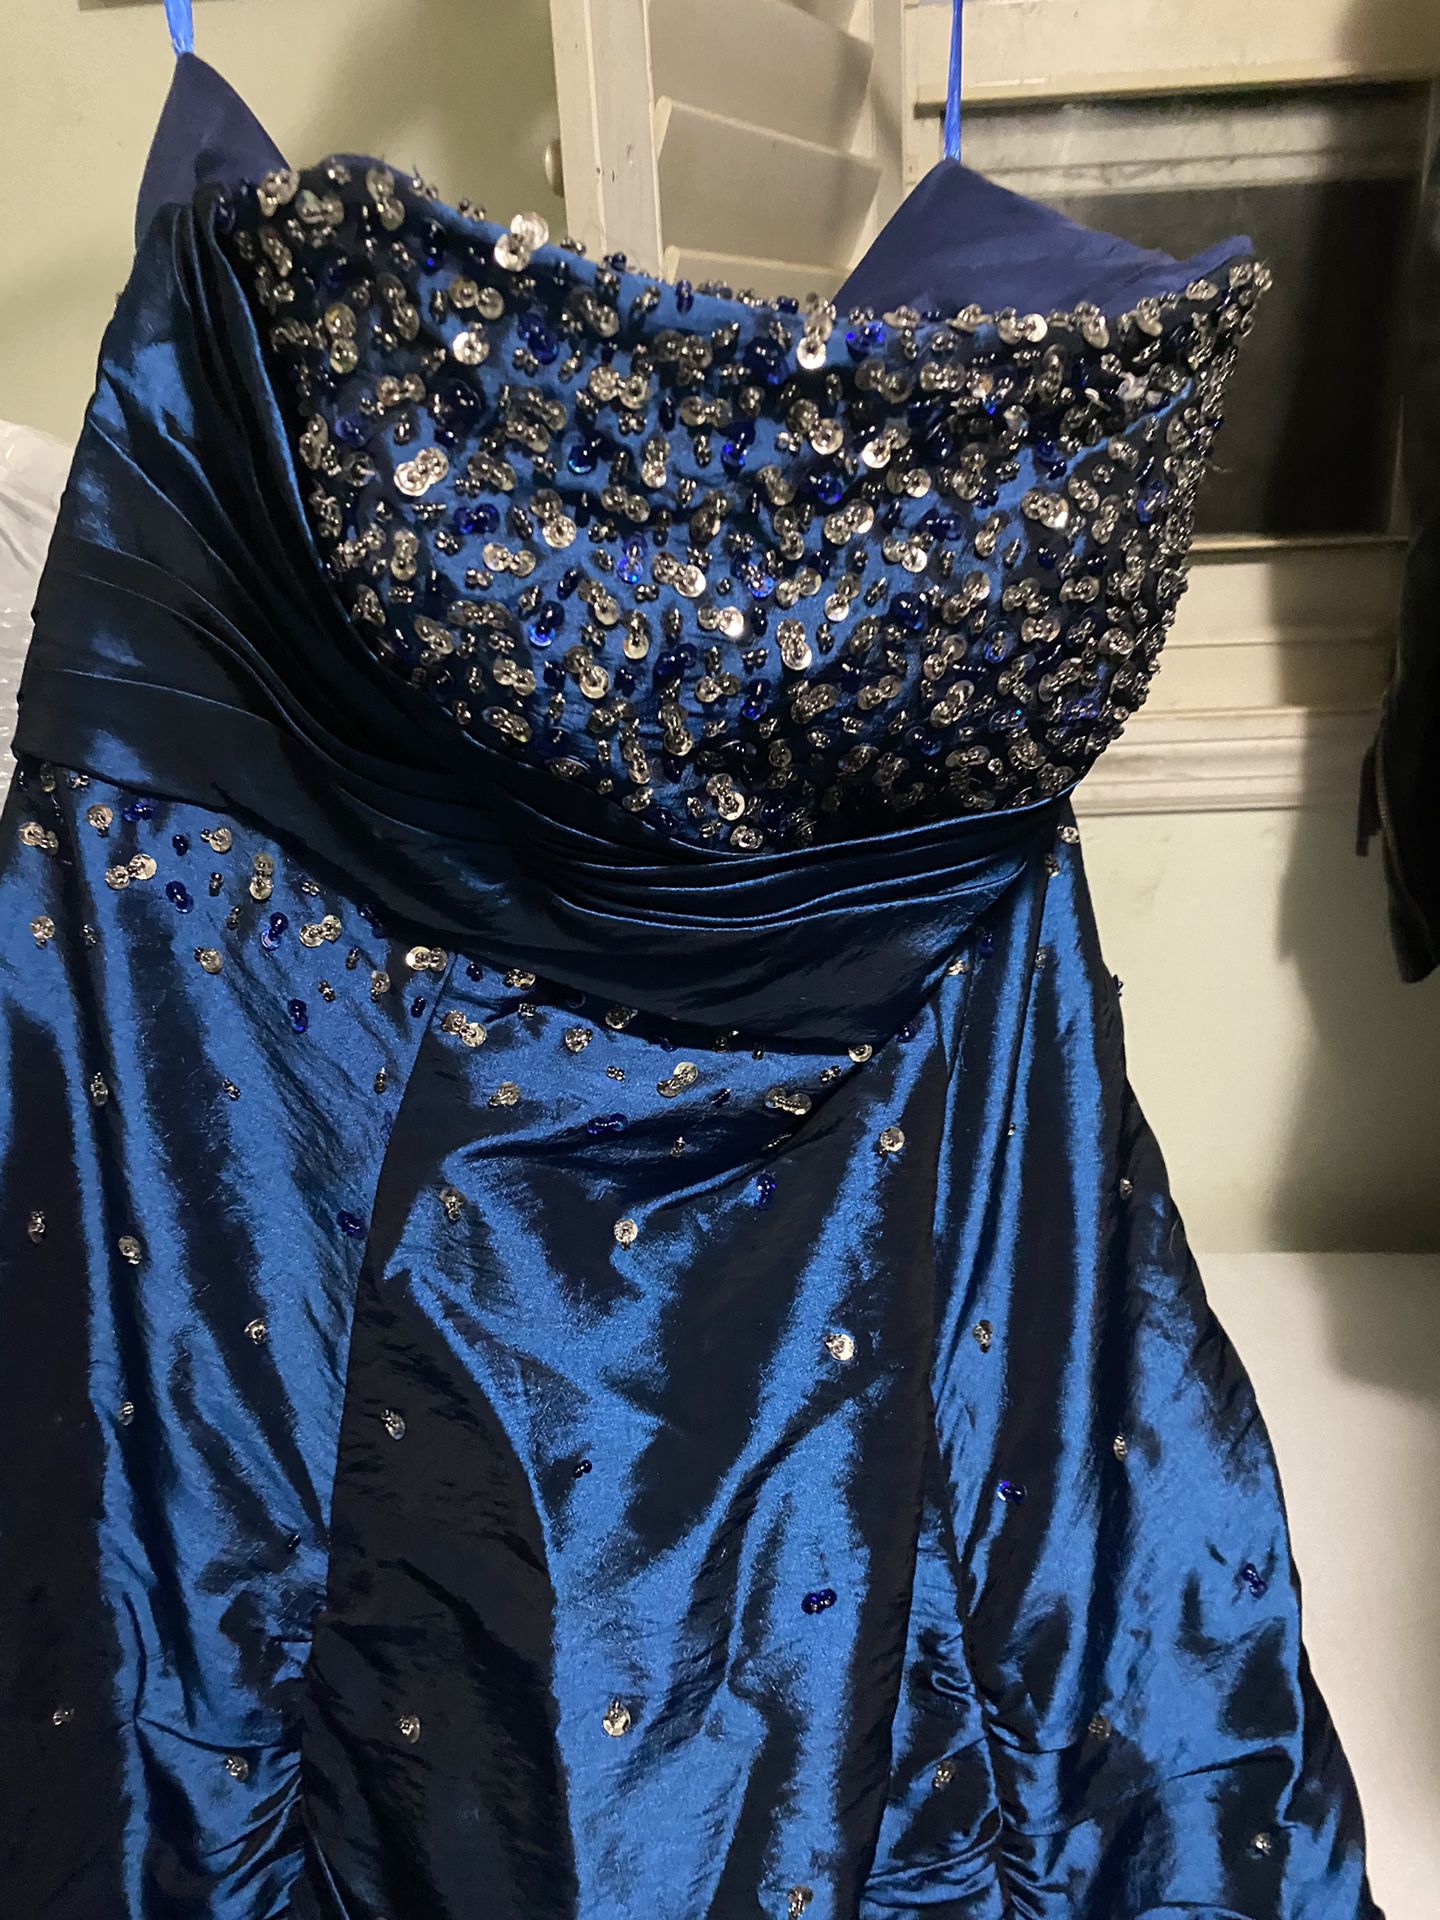 Fairytale gown, Saphire Blue, And It Doesn’t Have A Size But My Guess Is 